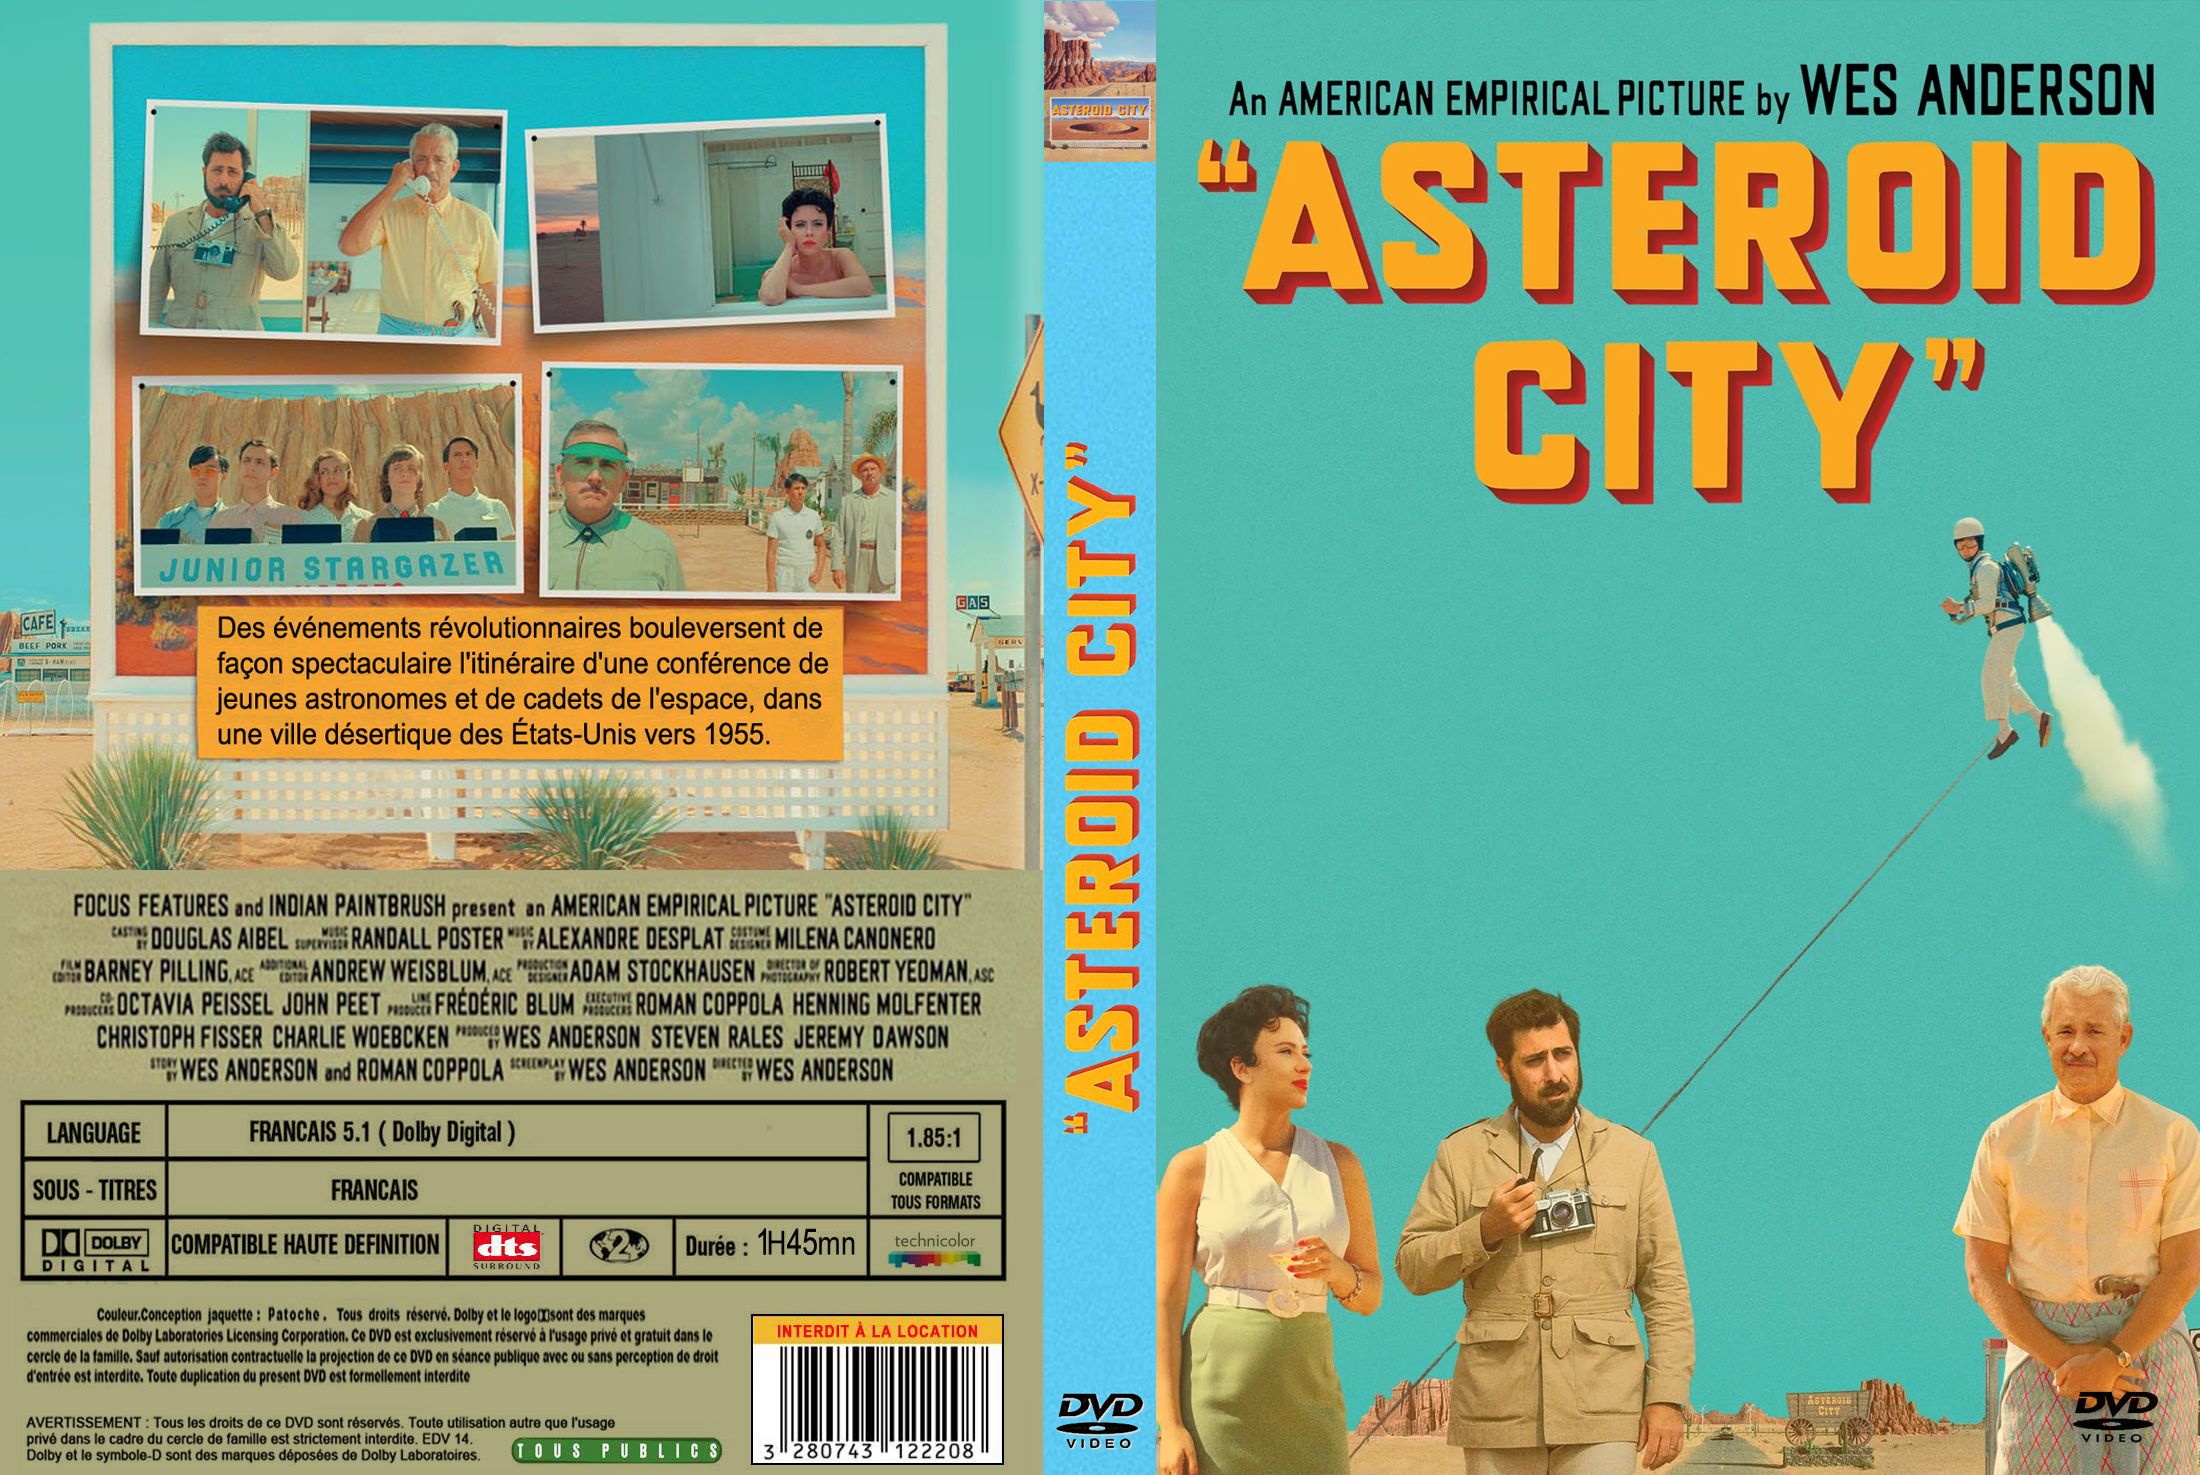 Jaquette DVD Asteroid city custom